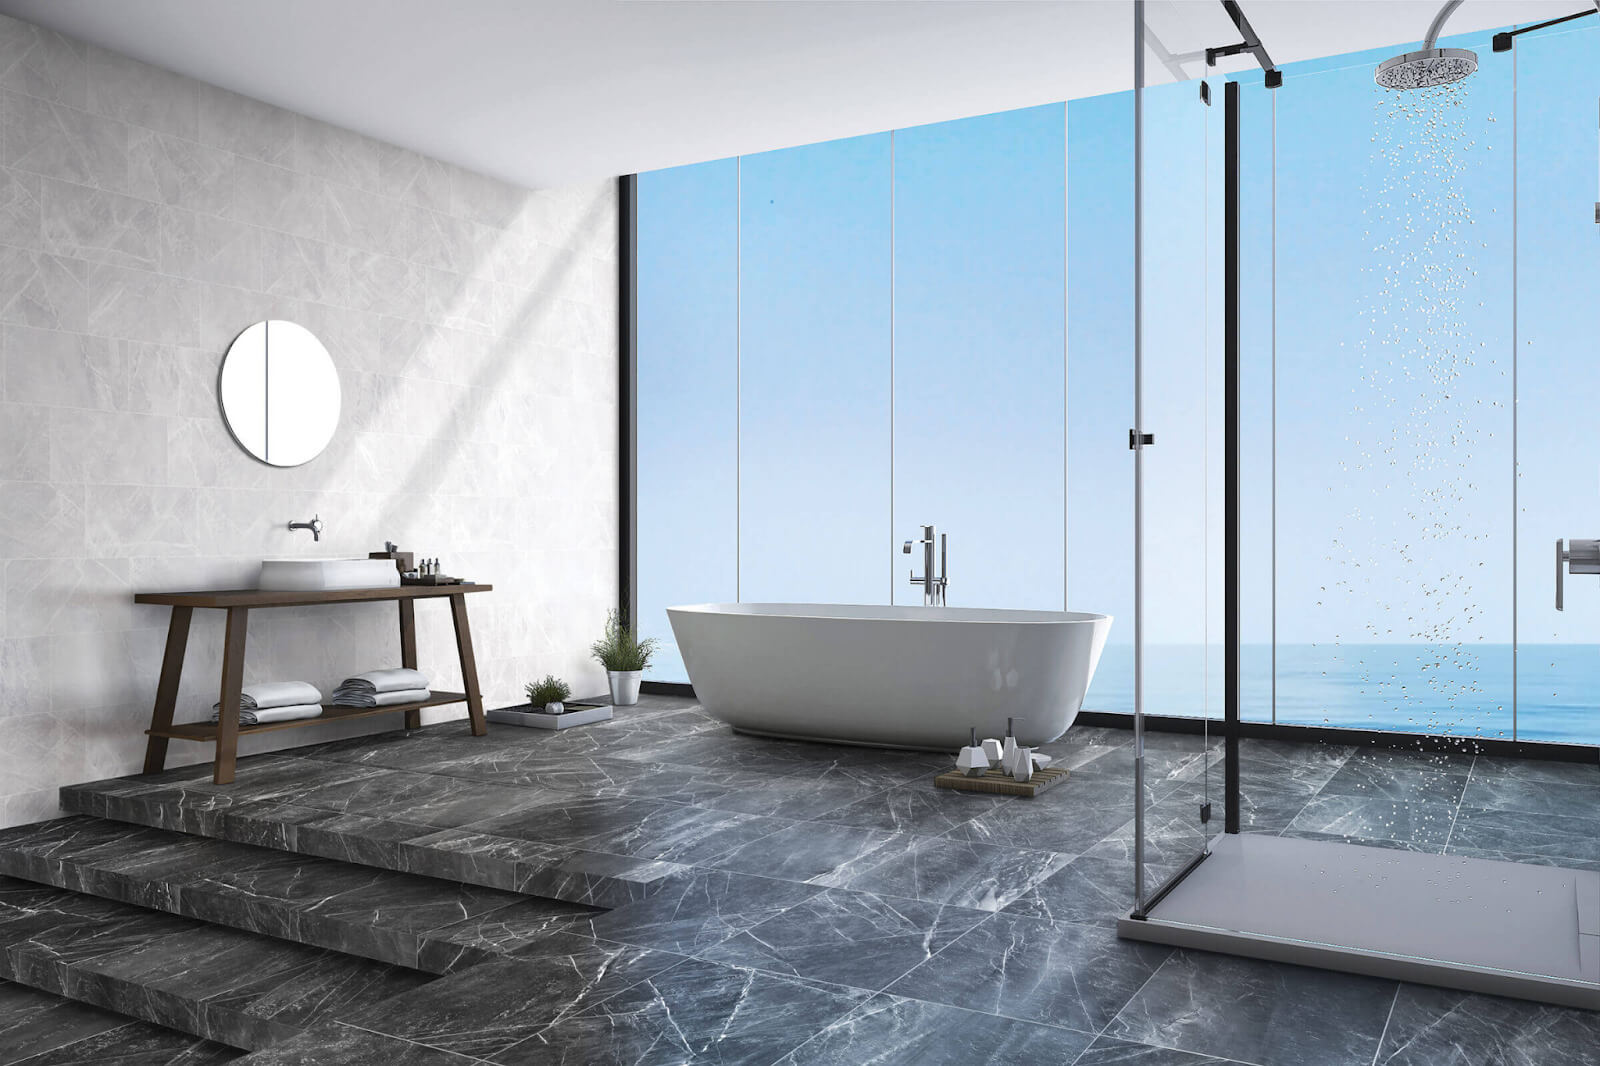 Ceramic Tile: A Healthy Choice for a Healthy Planet